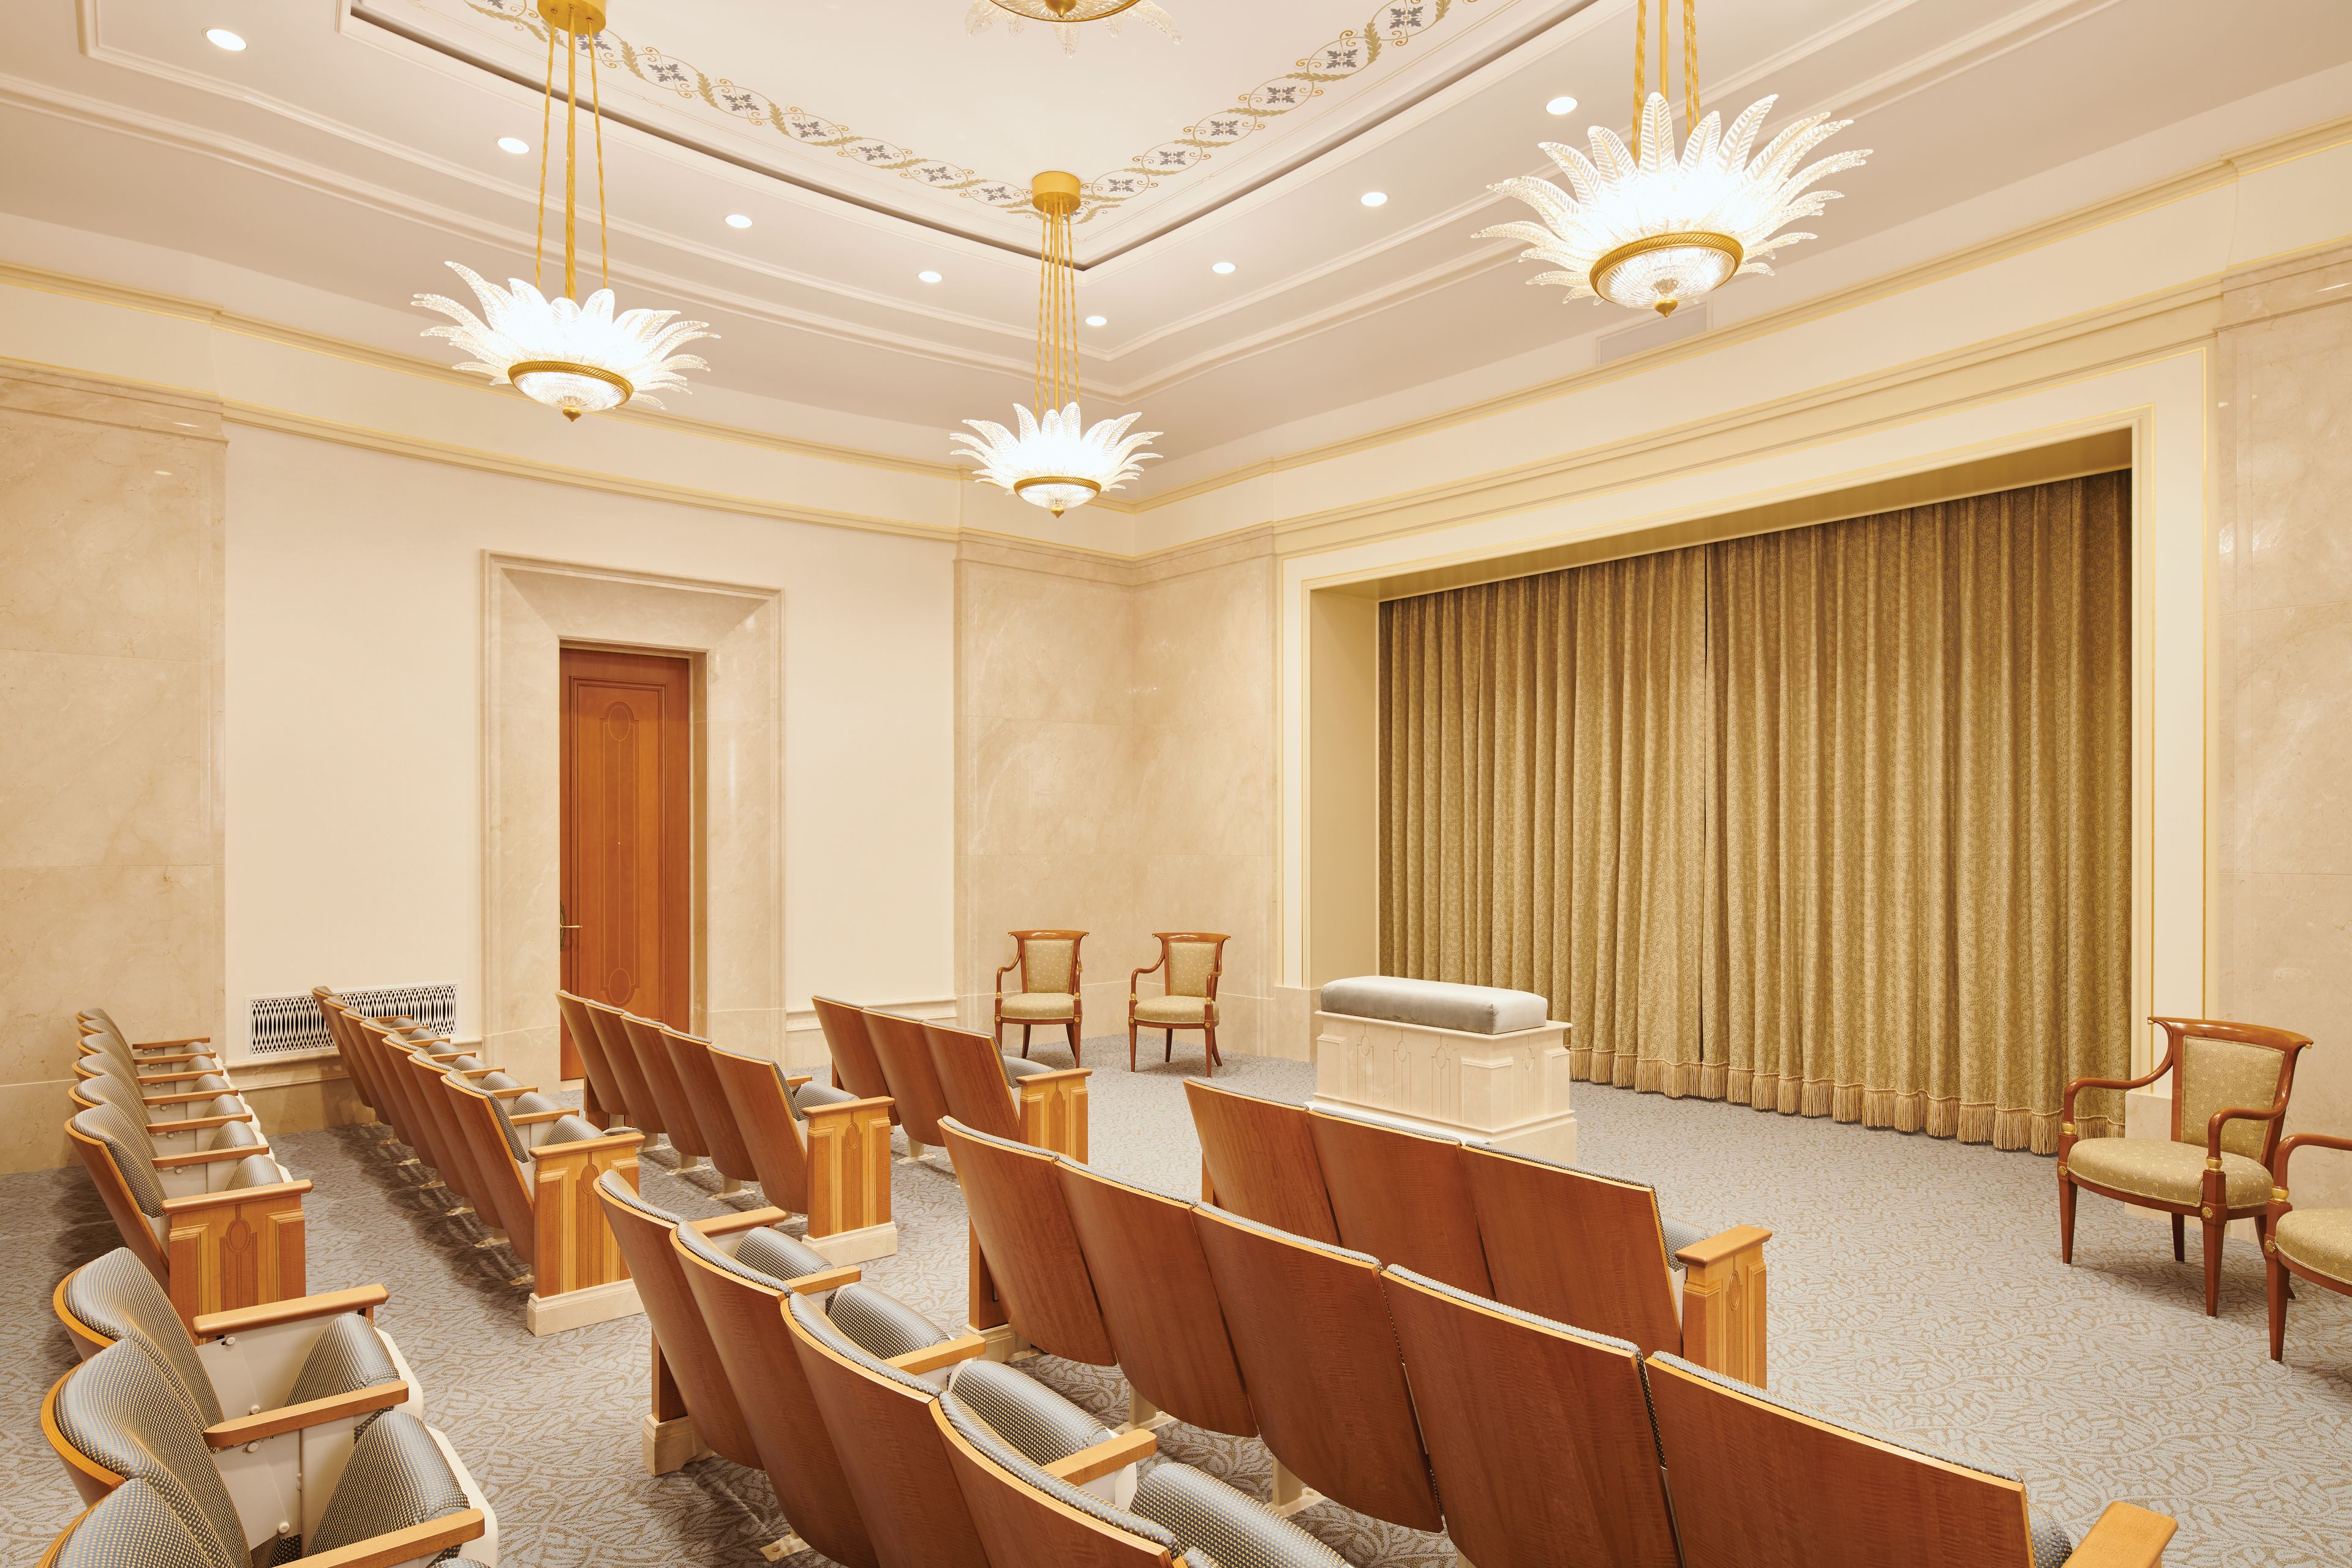 An instruction room in the Rome Italy Temple, with an altar where patrons make promises to God.